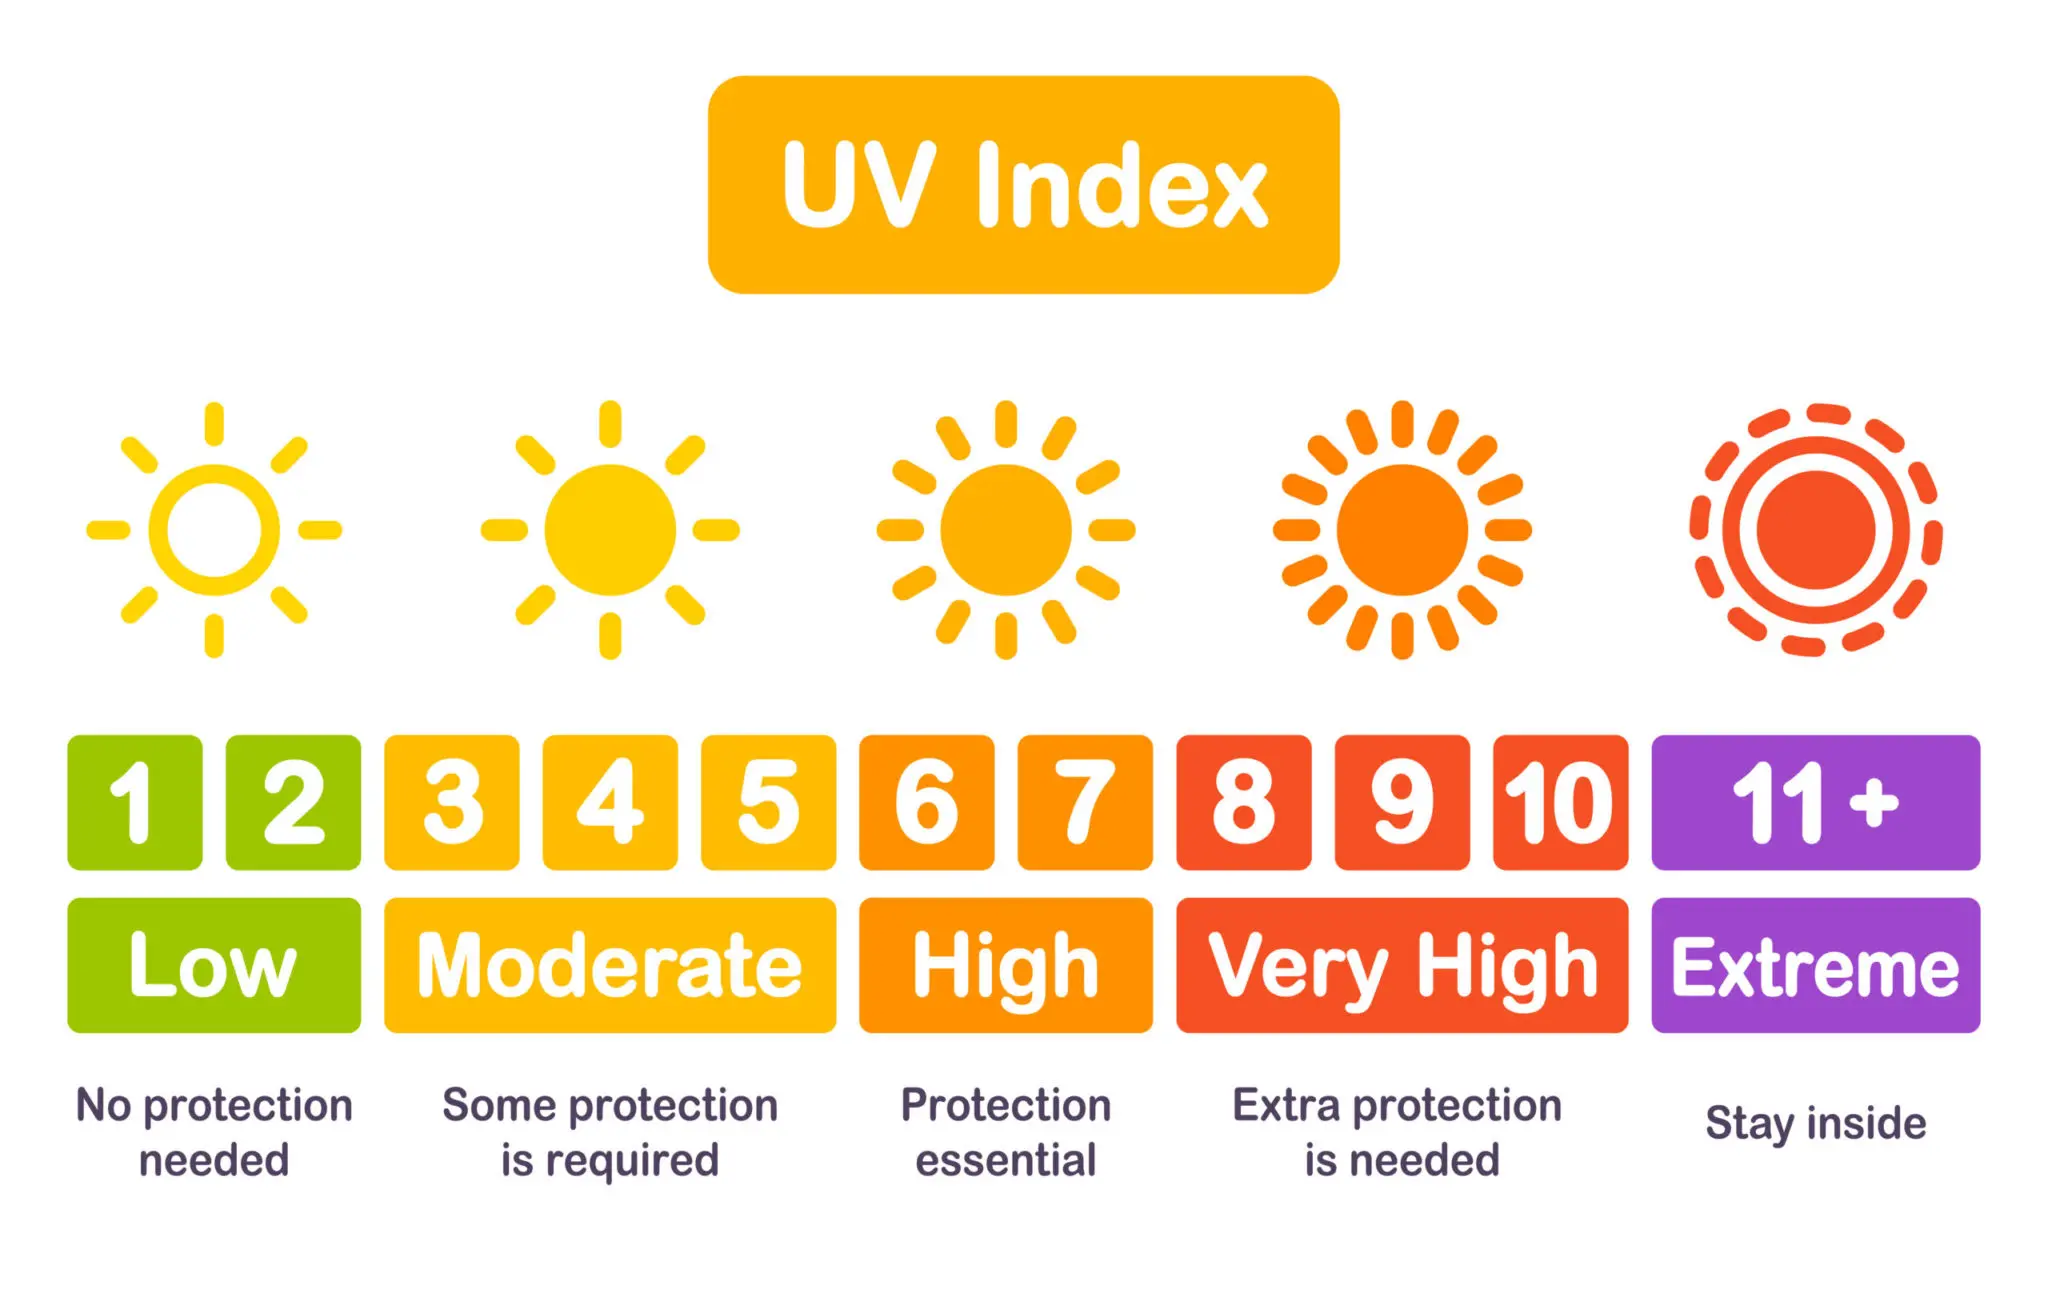 What is the Best Uv Index to Tan in?